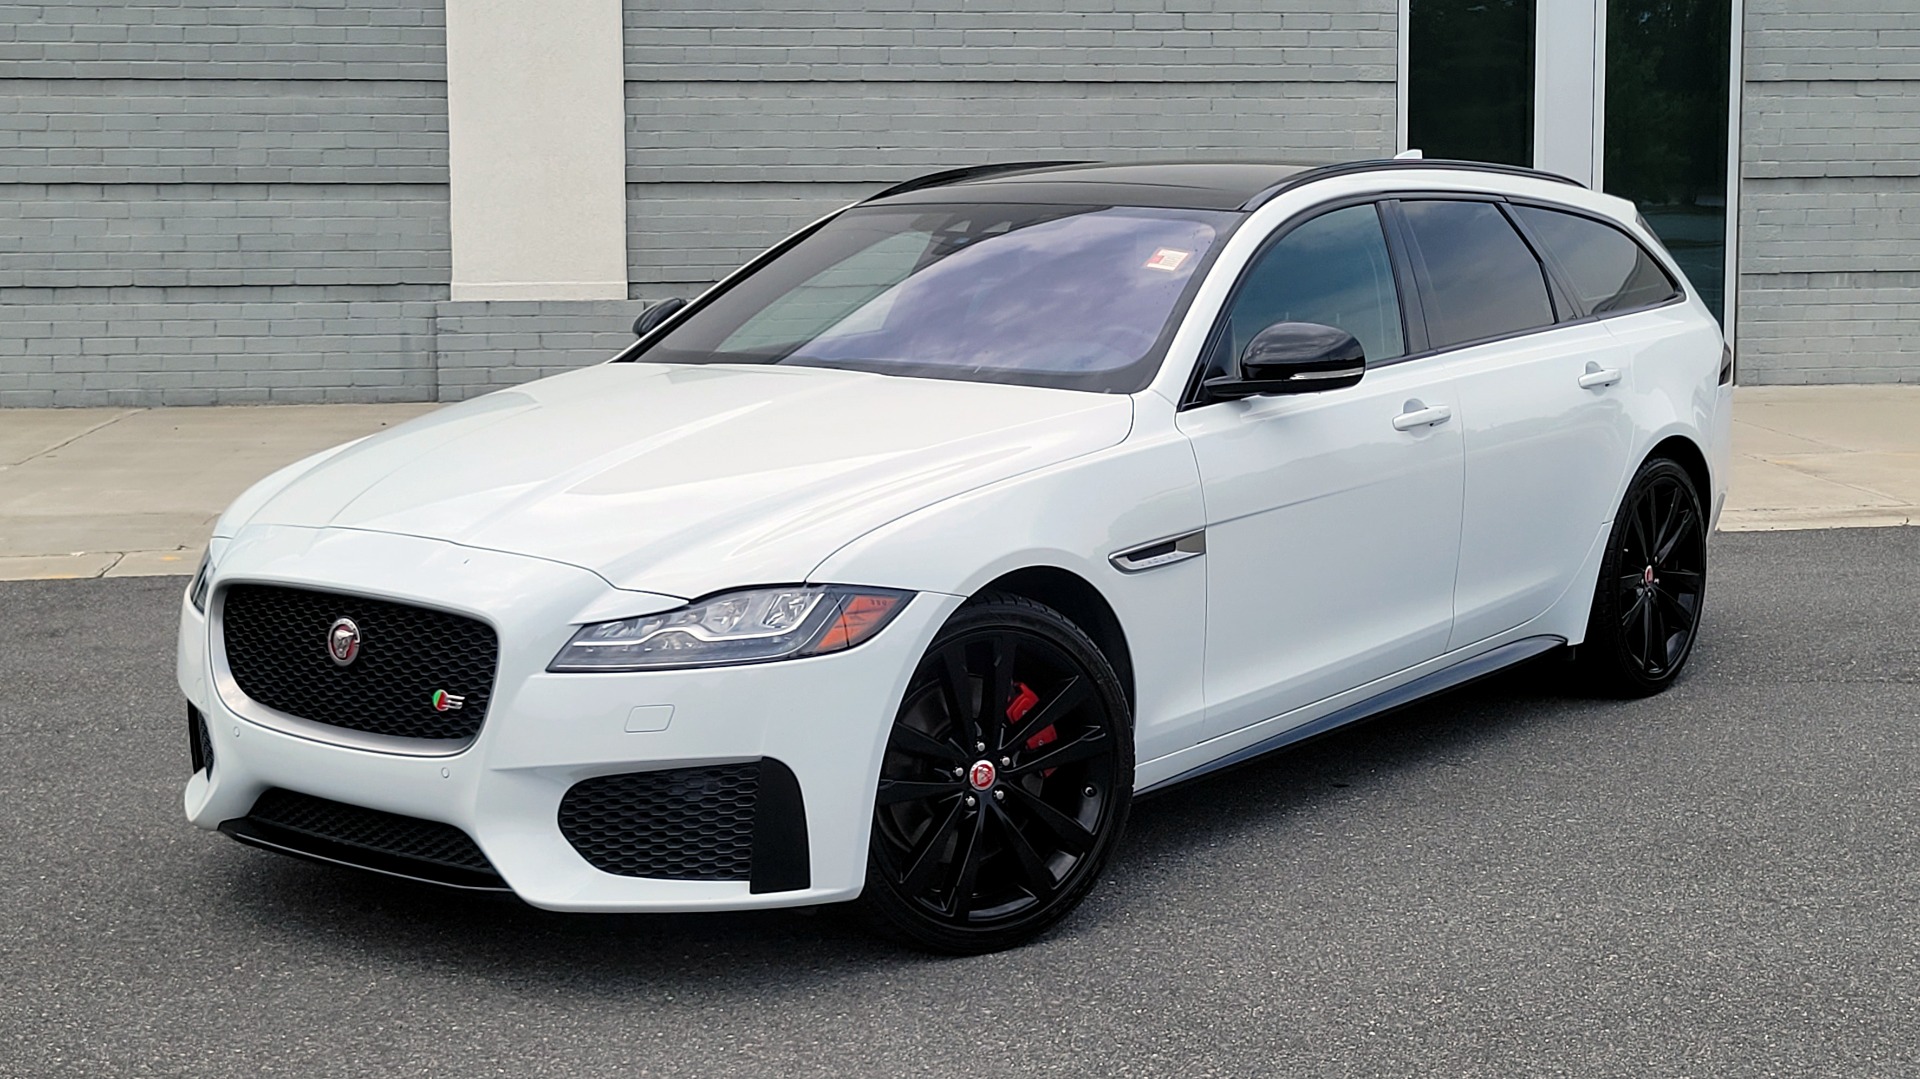 Used 2018 Jaguar XF SPORTBRAKE S / 3.0L / AWD / TECHNOLOGY / NAV / PANO-ROOF / REARVIEW for sale $46,995 at Formula Imports in Charlotte NC 28227 1